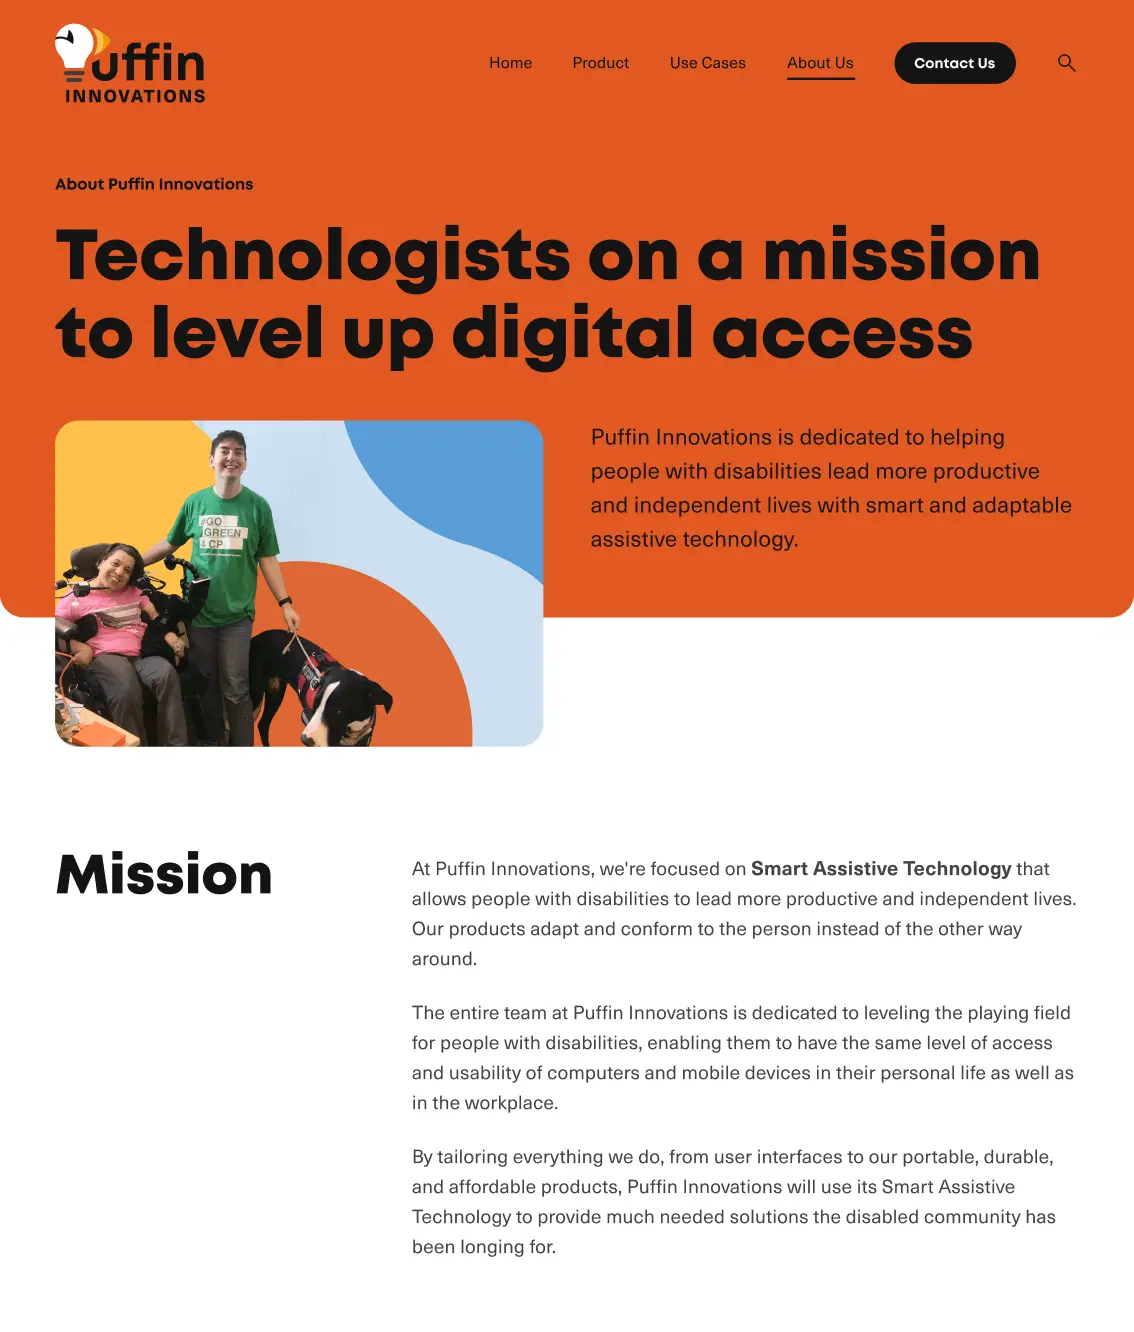 Top of desktop about page. First section is orange and titled 'Technologists on a mission to level up digital access' in large bold black text with cutout graphic of Adriana, Elijah and their service dog and smaller text below. Second section is white and titled 'Mission' with a few blocks of text next to it.